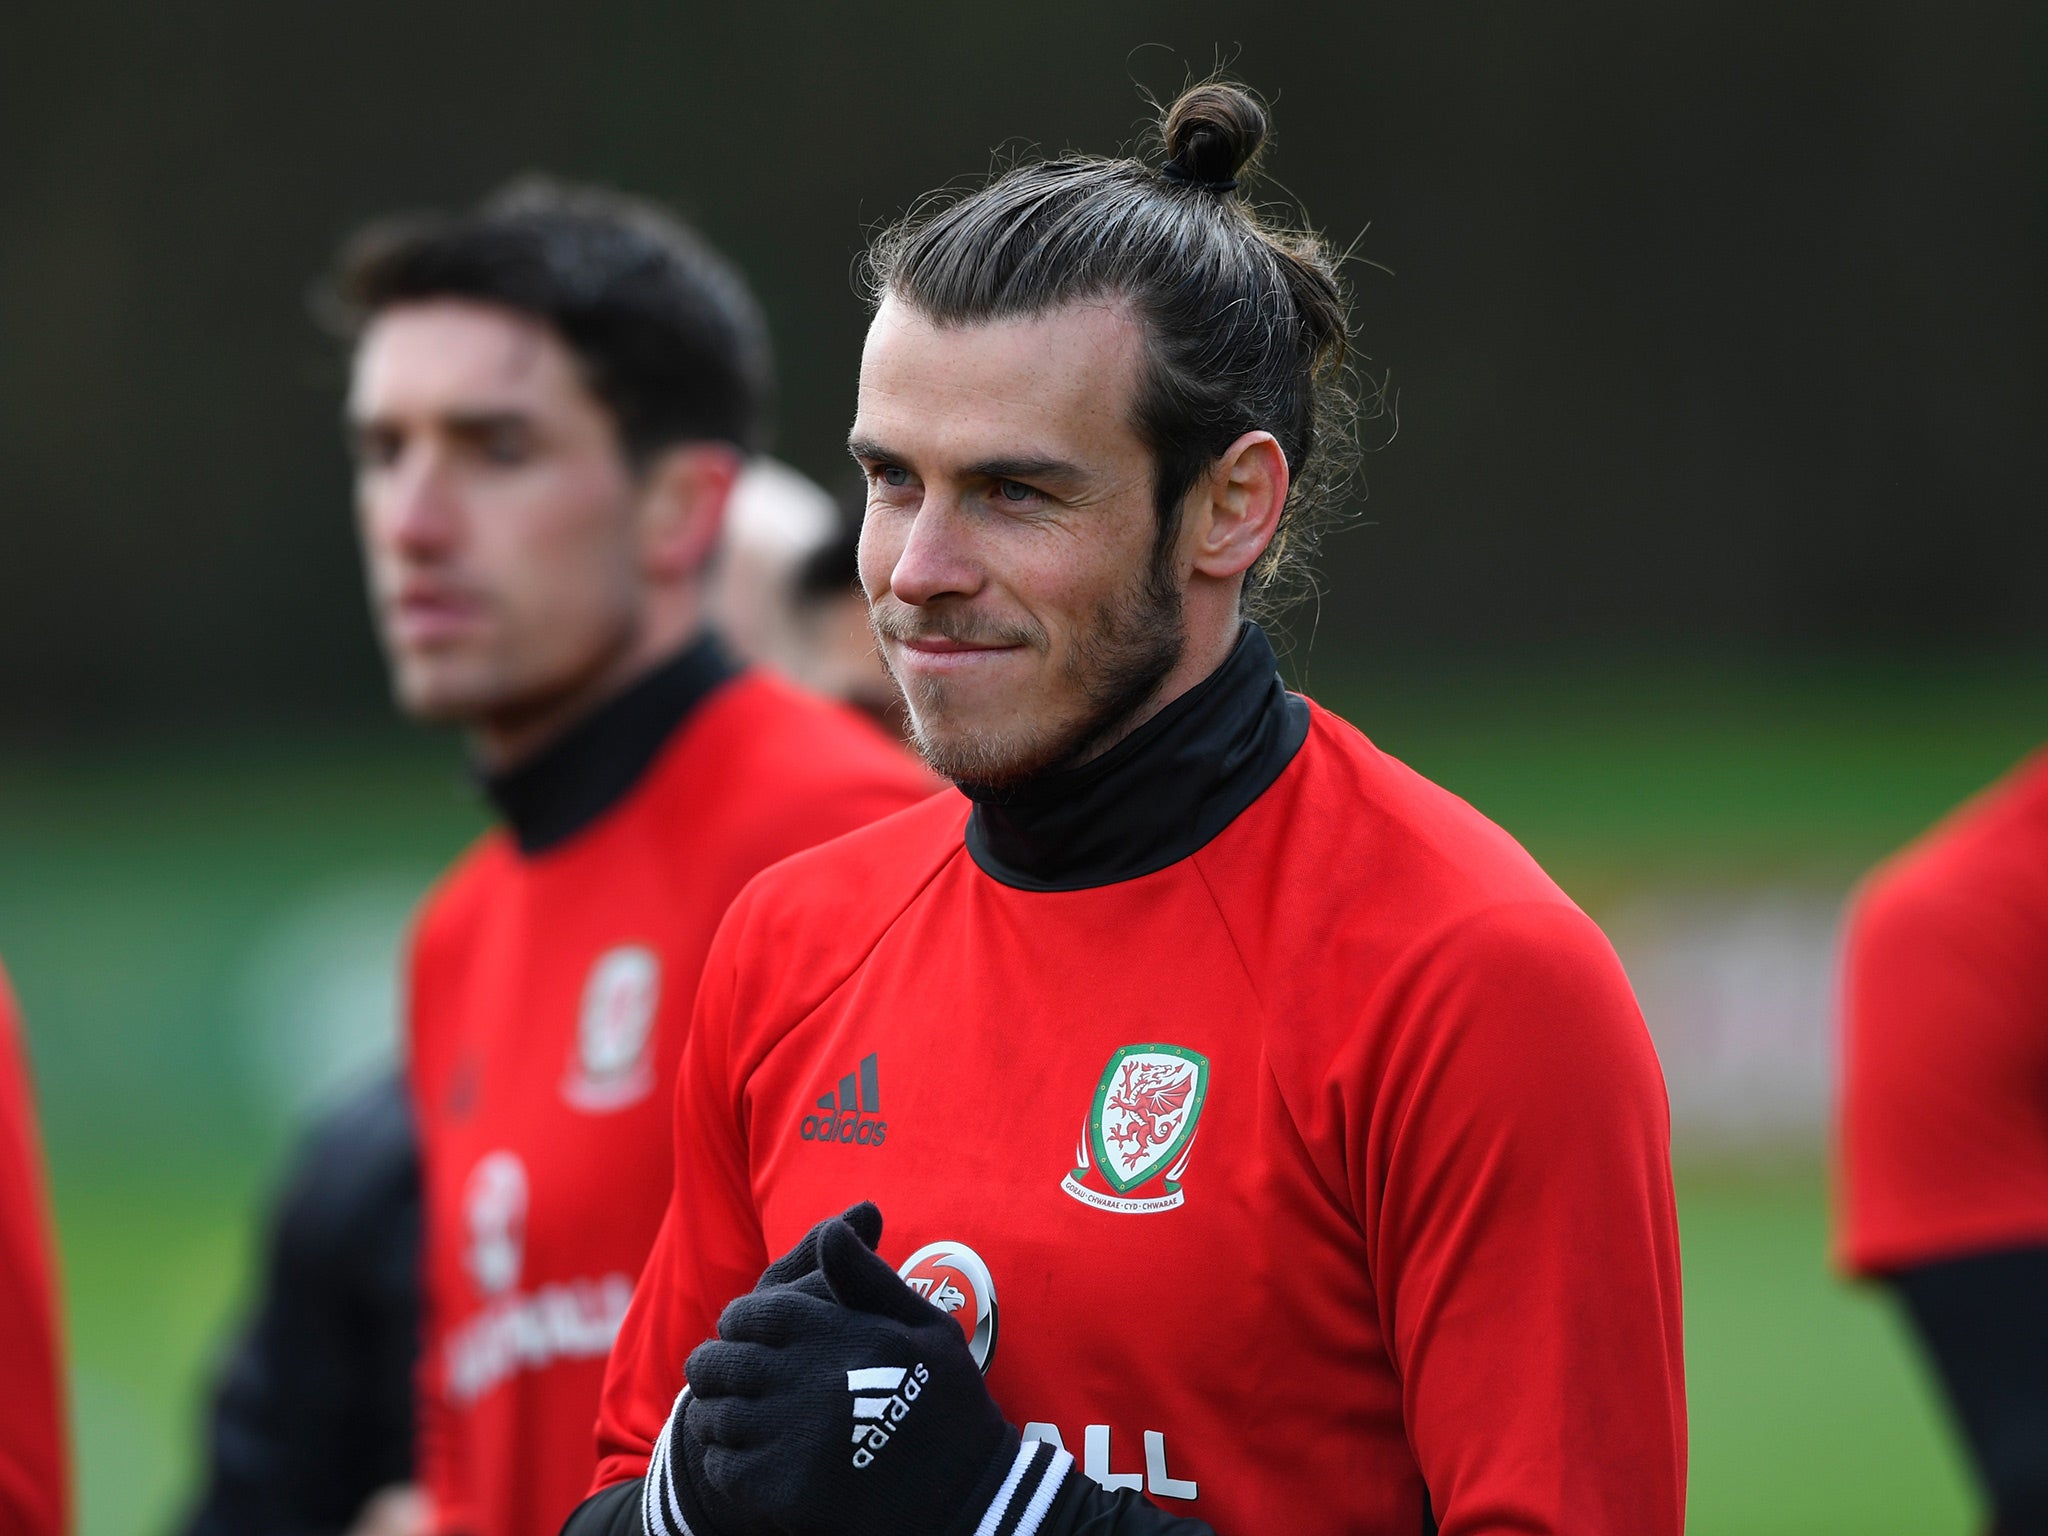 Gareth Bale has taken part in training with Wales this week